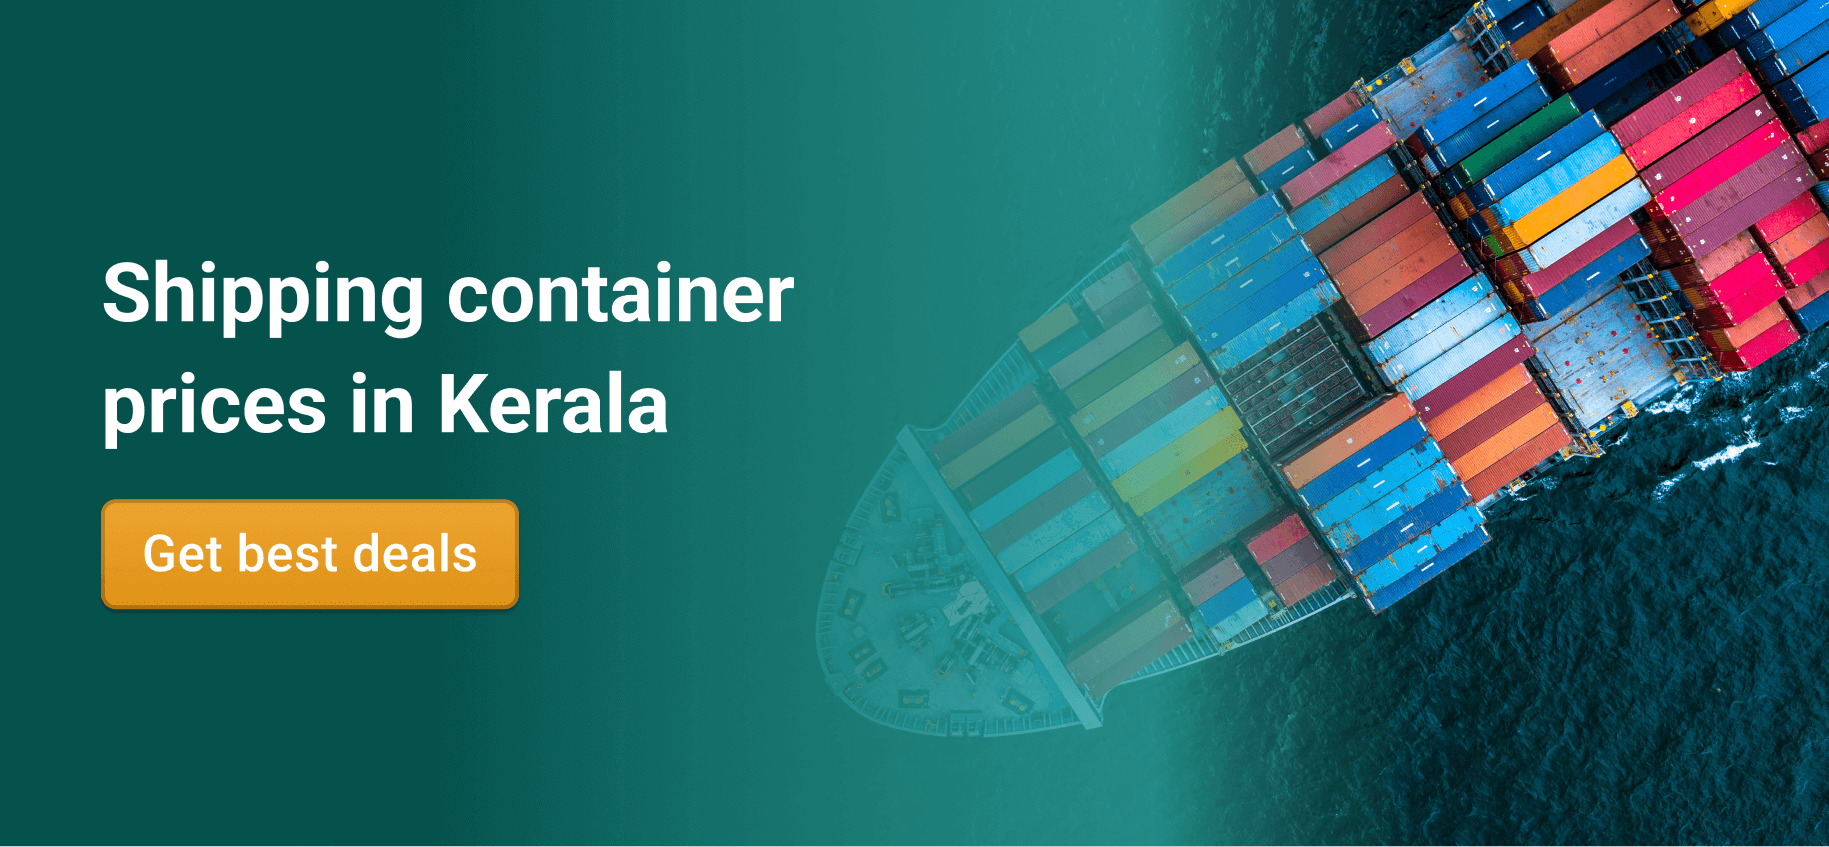 Shipping container price in Kerala